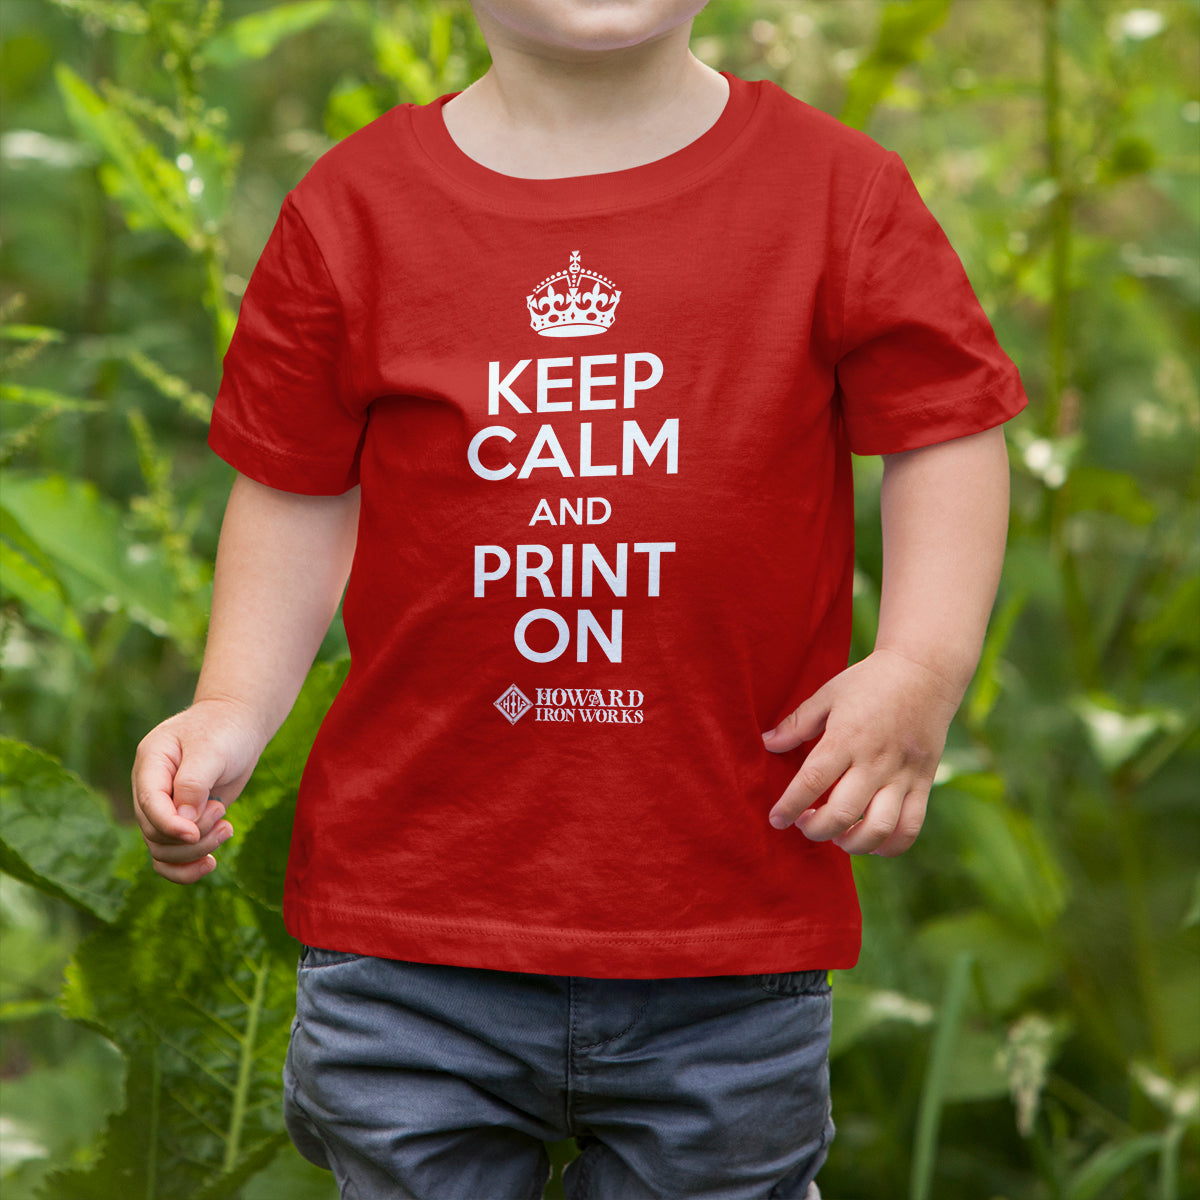 Toddler T-shirt, Keep Calm, Red - from Howard Iron Works Printing Museum